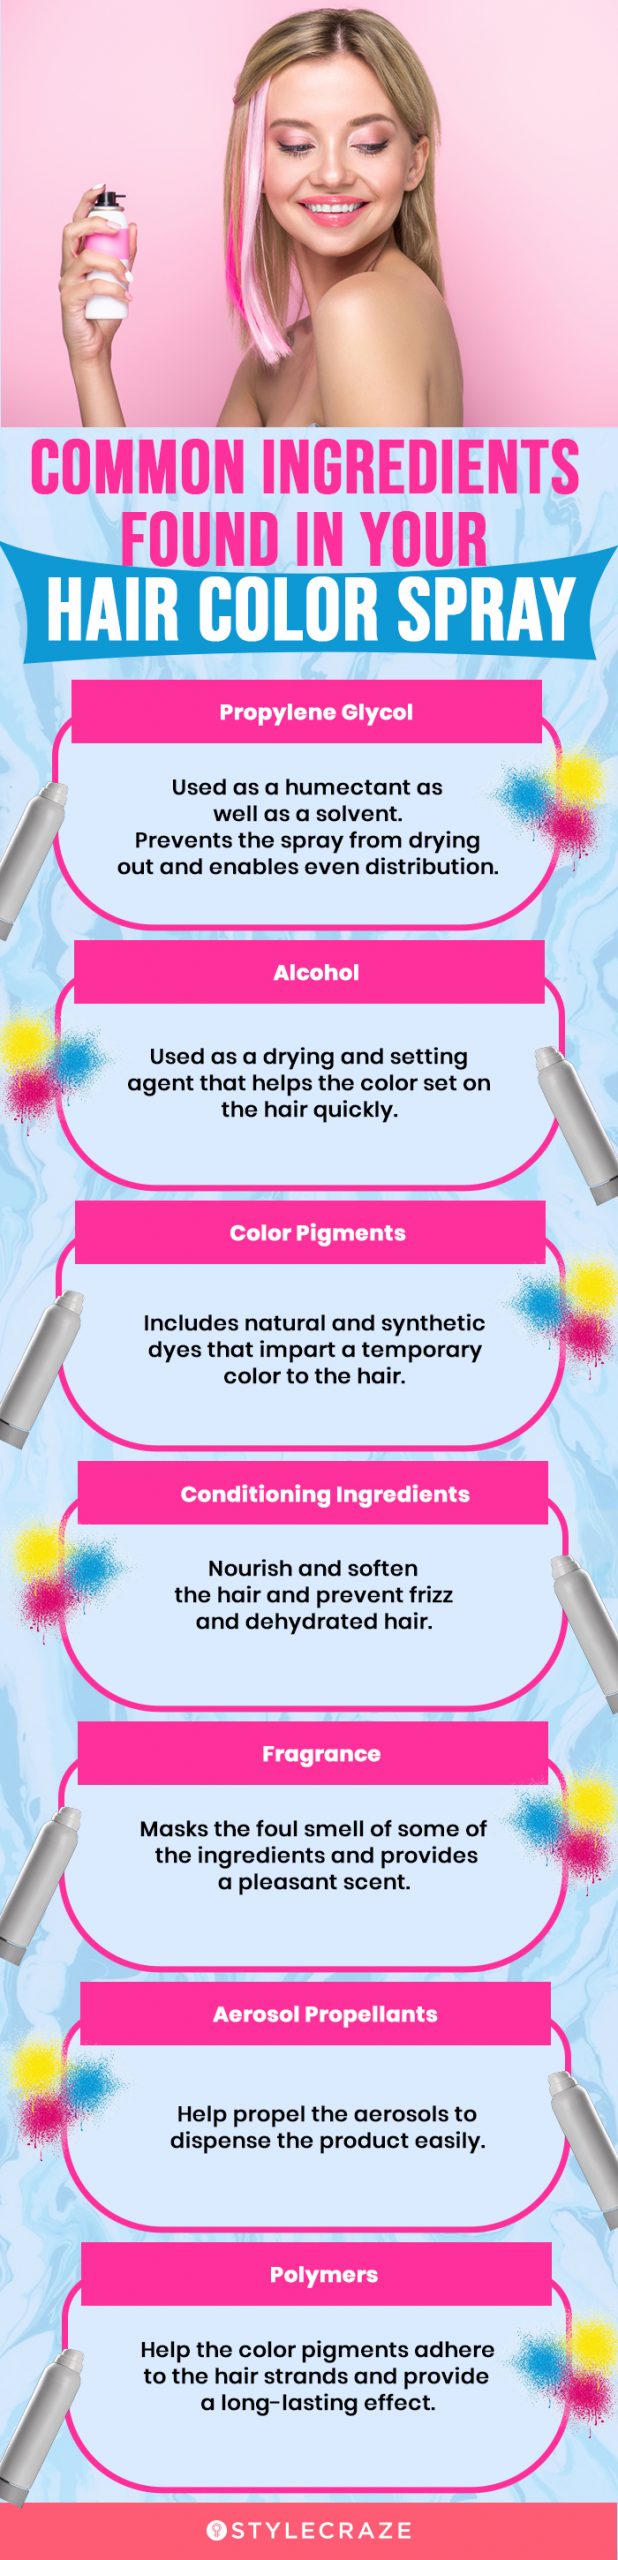 Common Ingredients Found In Your Hair Color Spray (infographic)